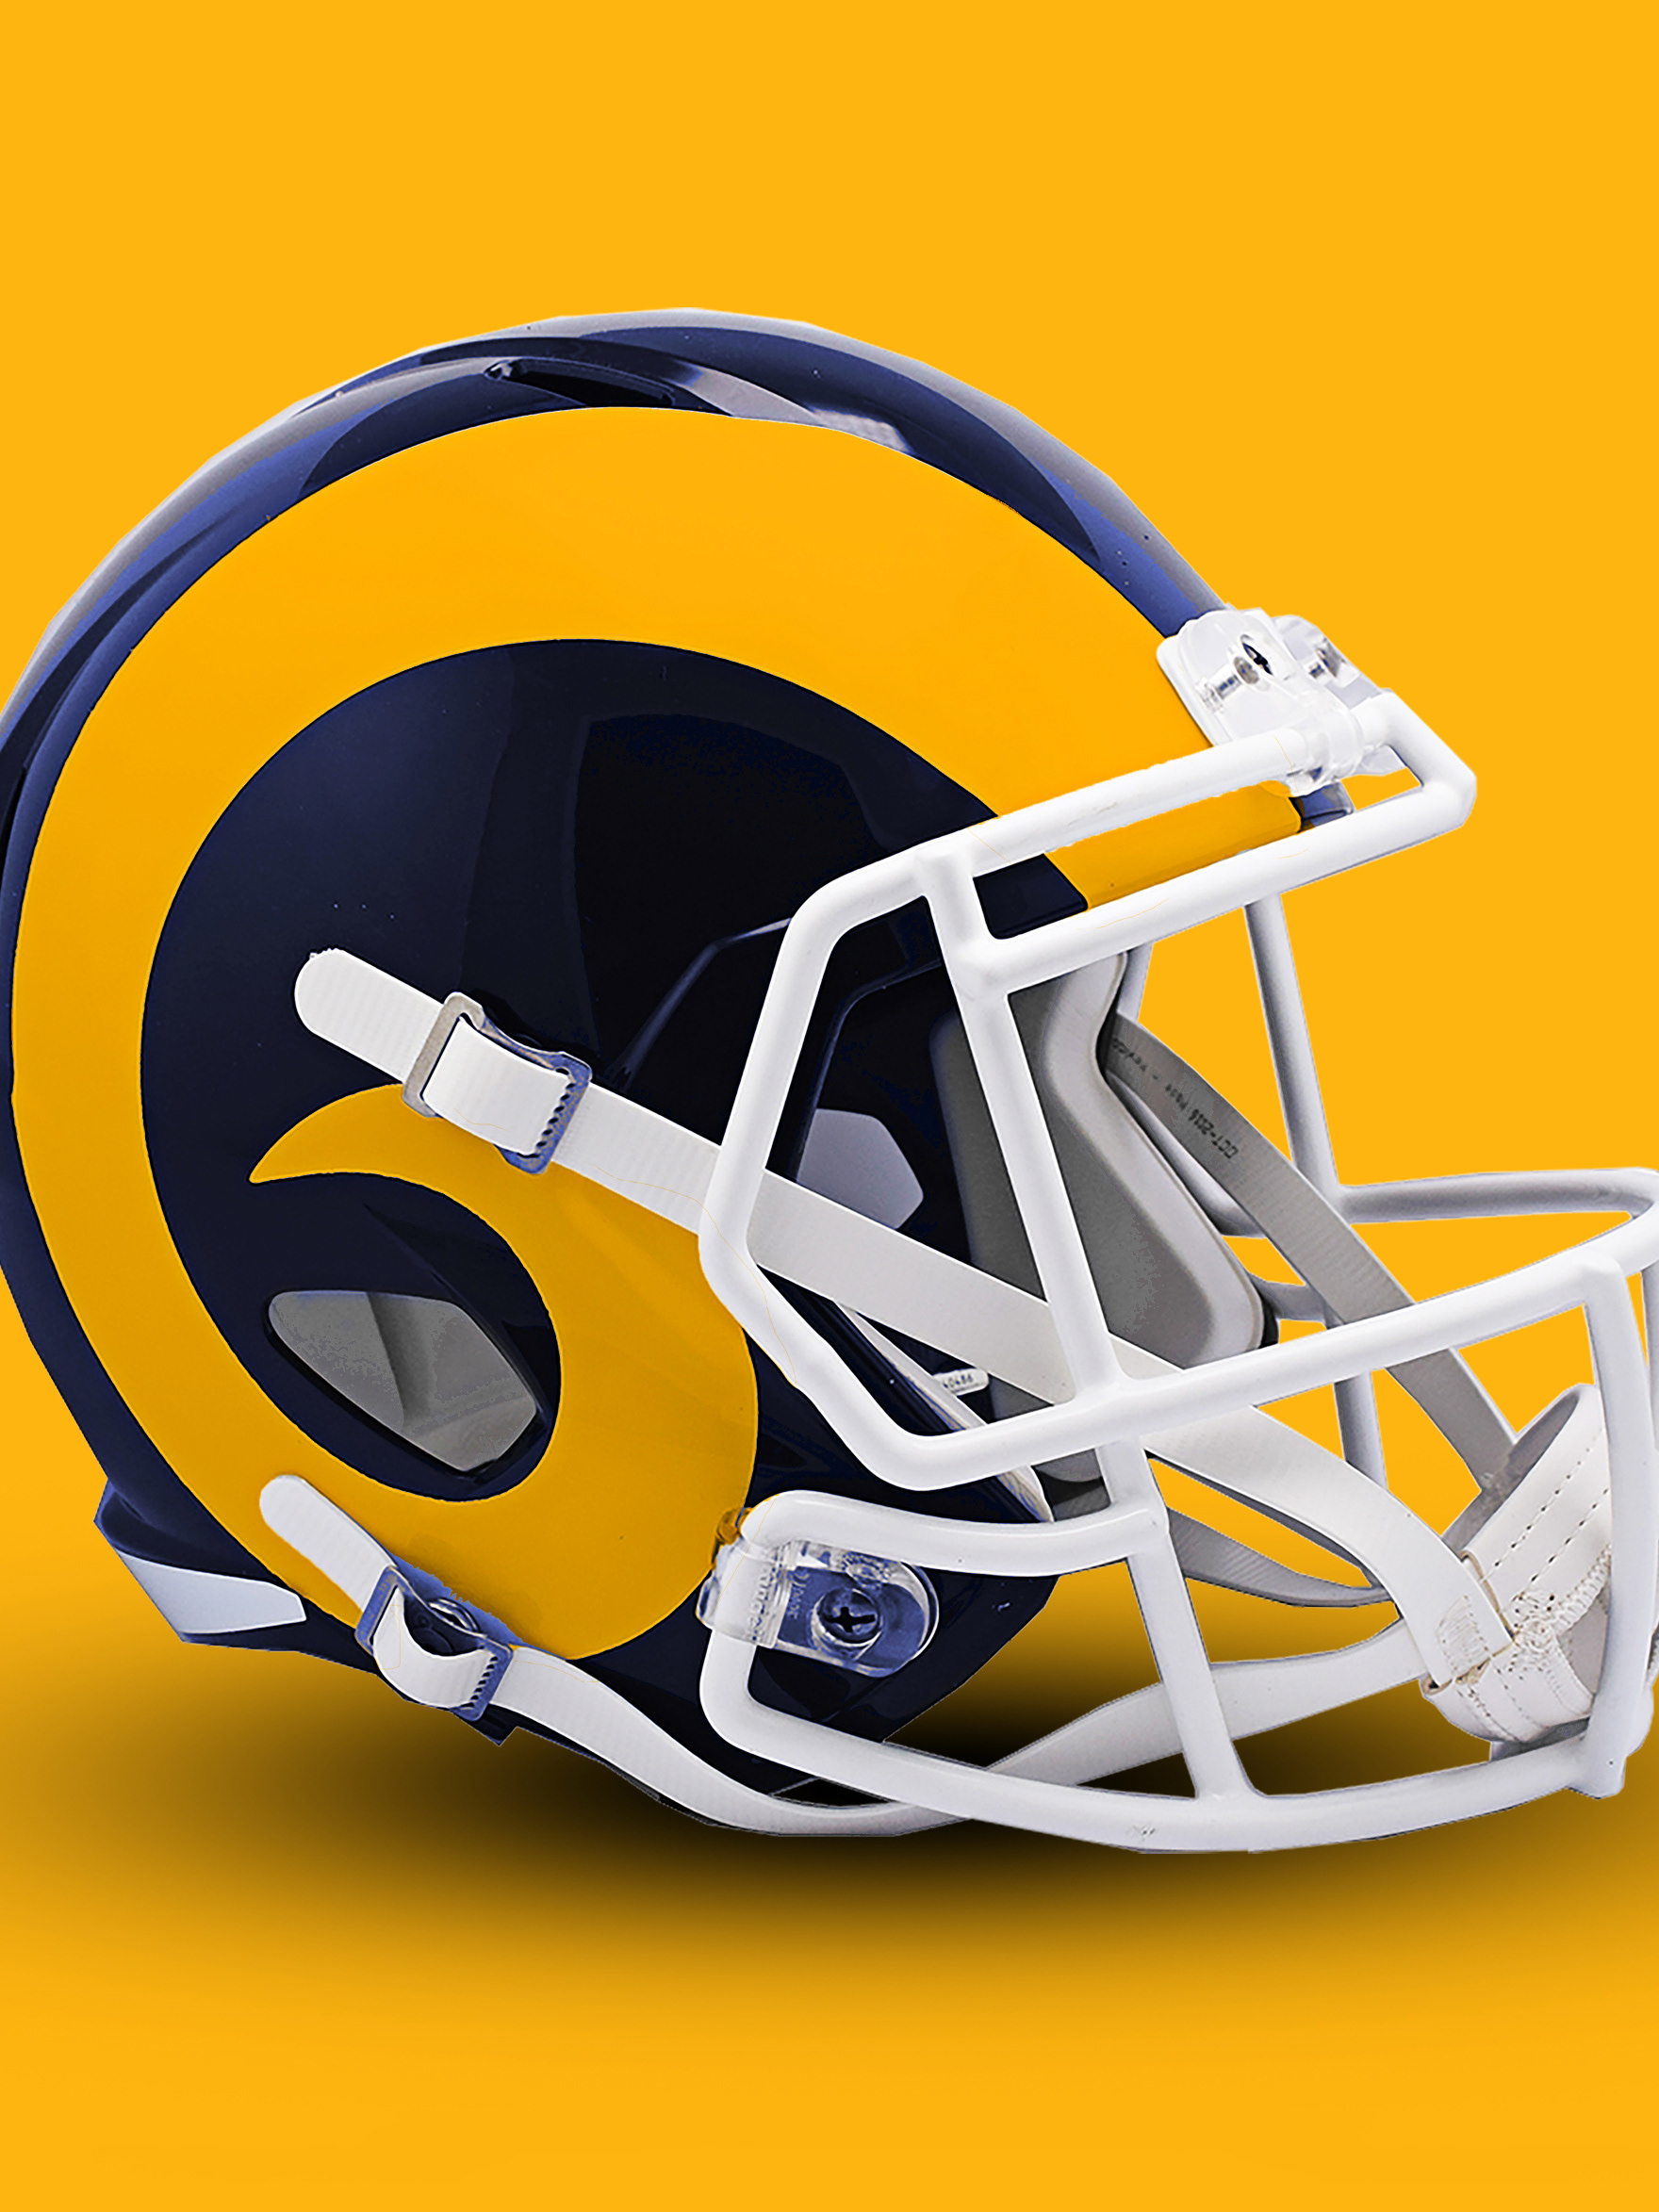 Rams have unusual plan for annual new uniform designs